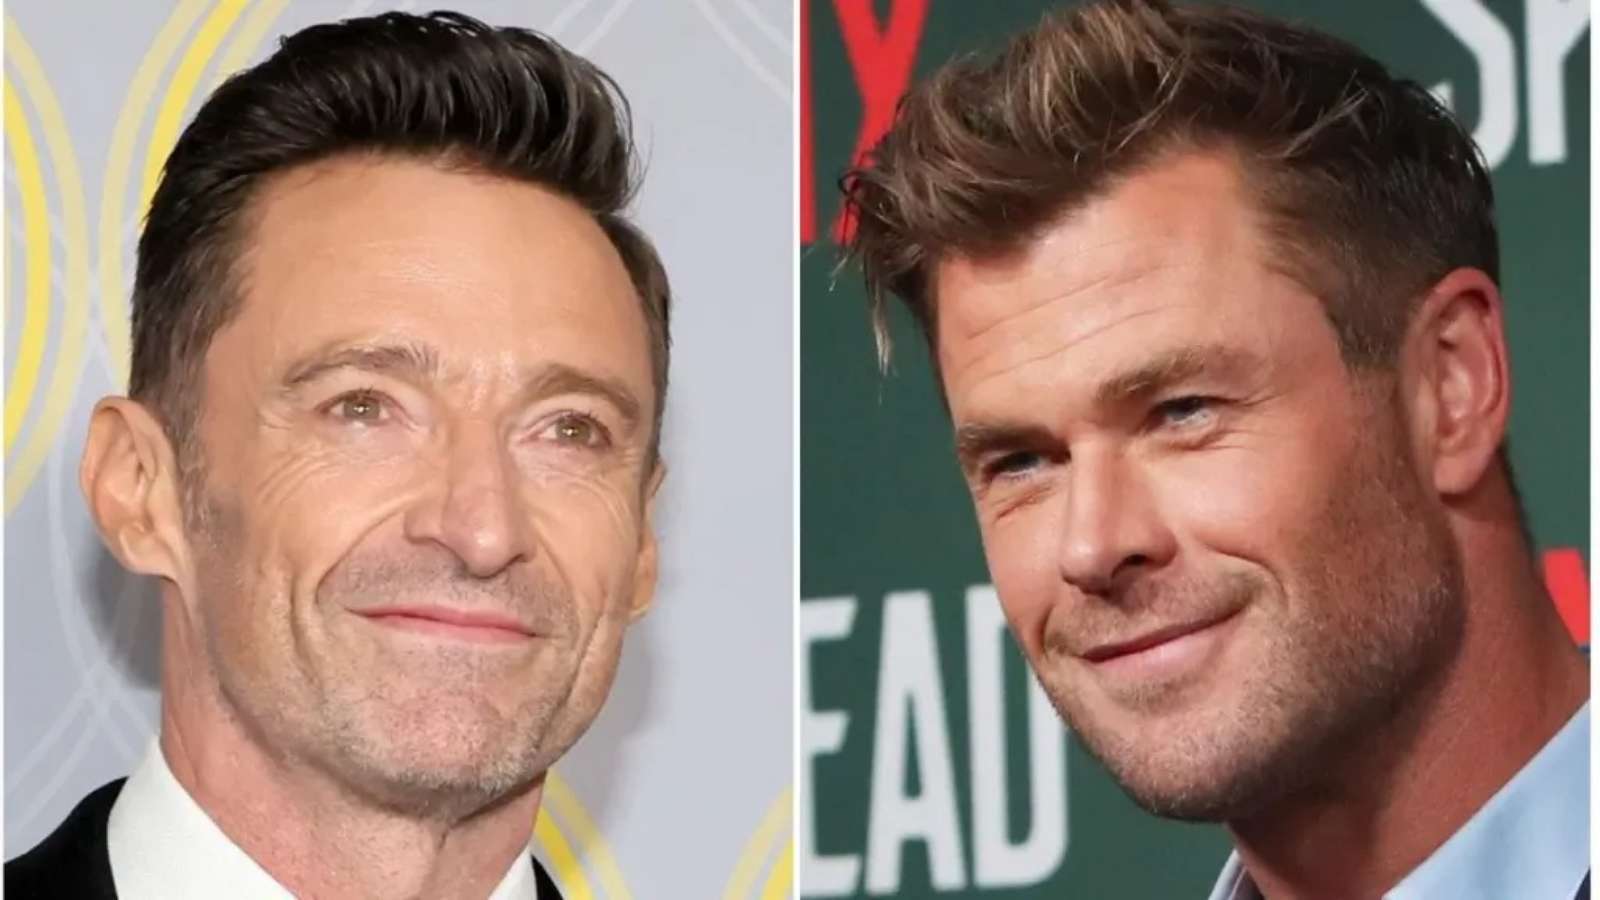 Jackman is still a tough competitor for Hemsworth